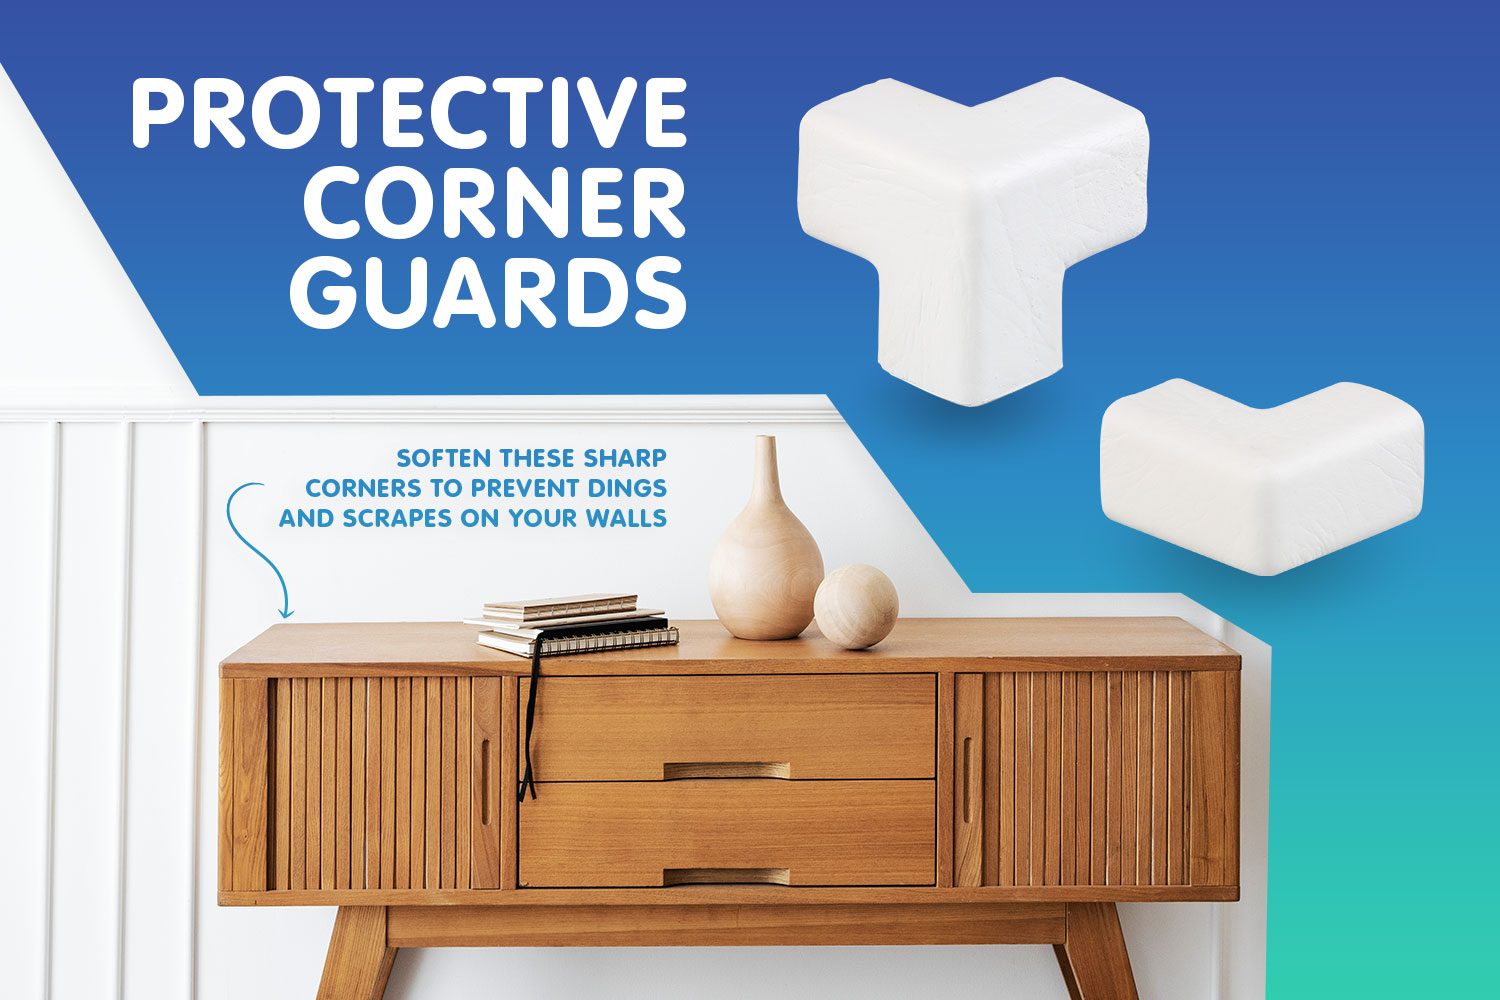 Soften & Protect with our Protective Corner Guards